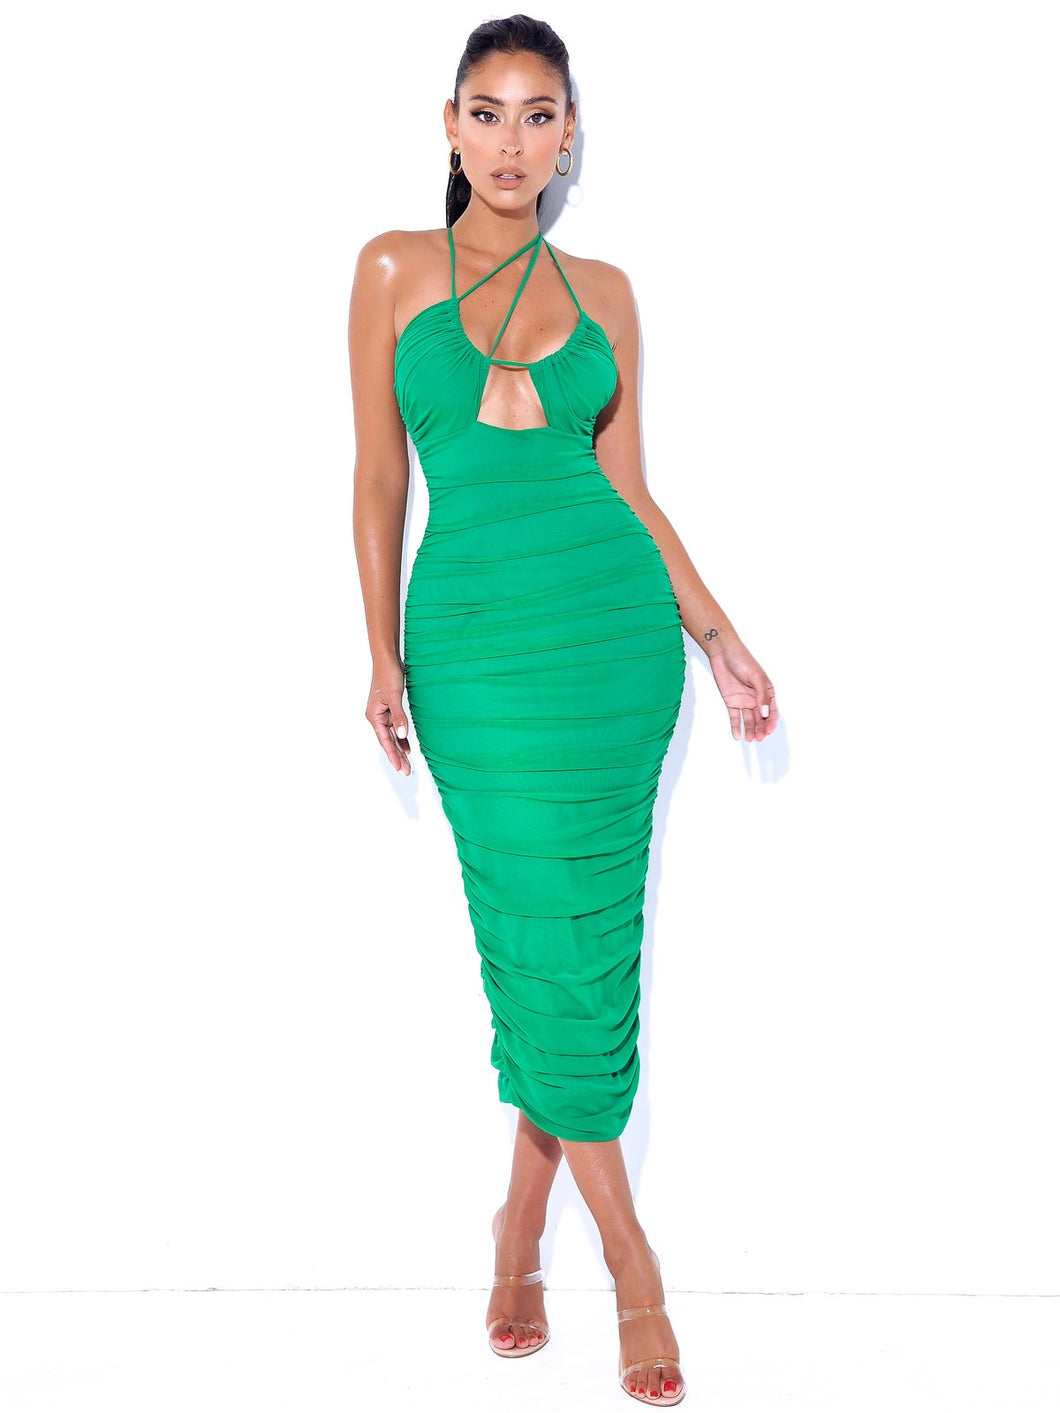 FELIS GREEN LACE-UP STRAPPY RUCHED MESH DRESS